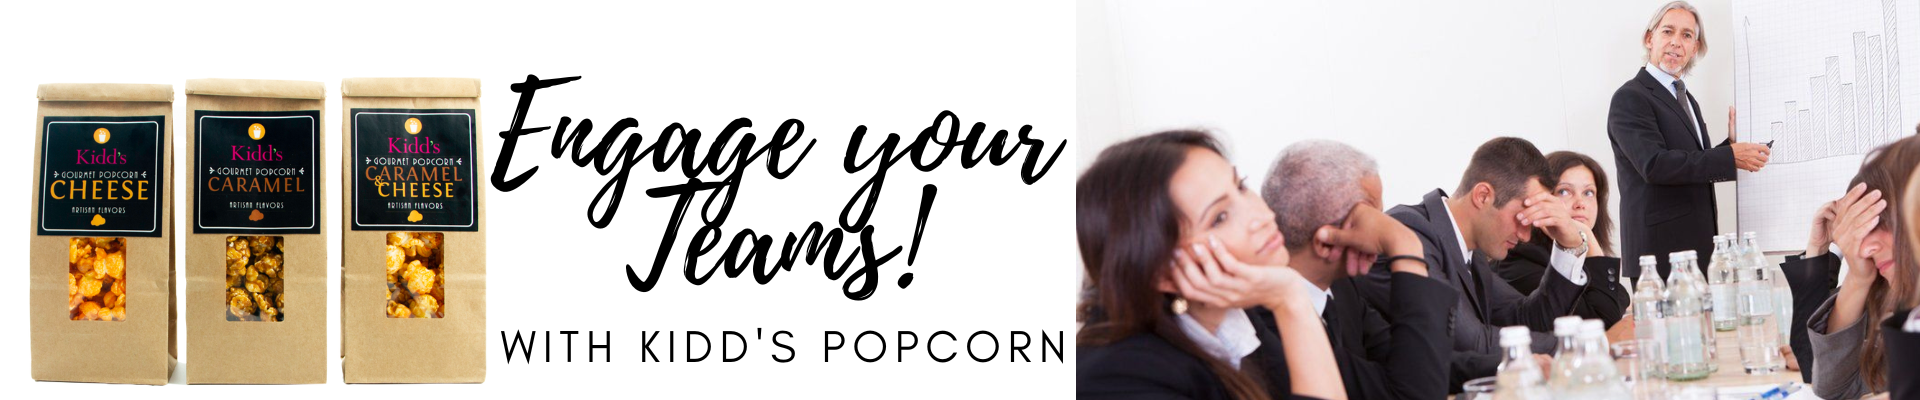 🍿 Bring More Excitement And Engagement To Your Next Meeting 🍿